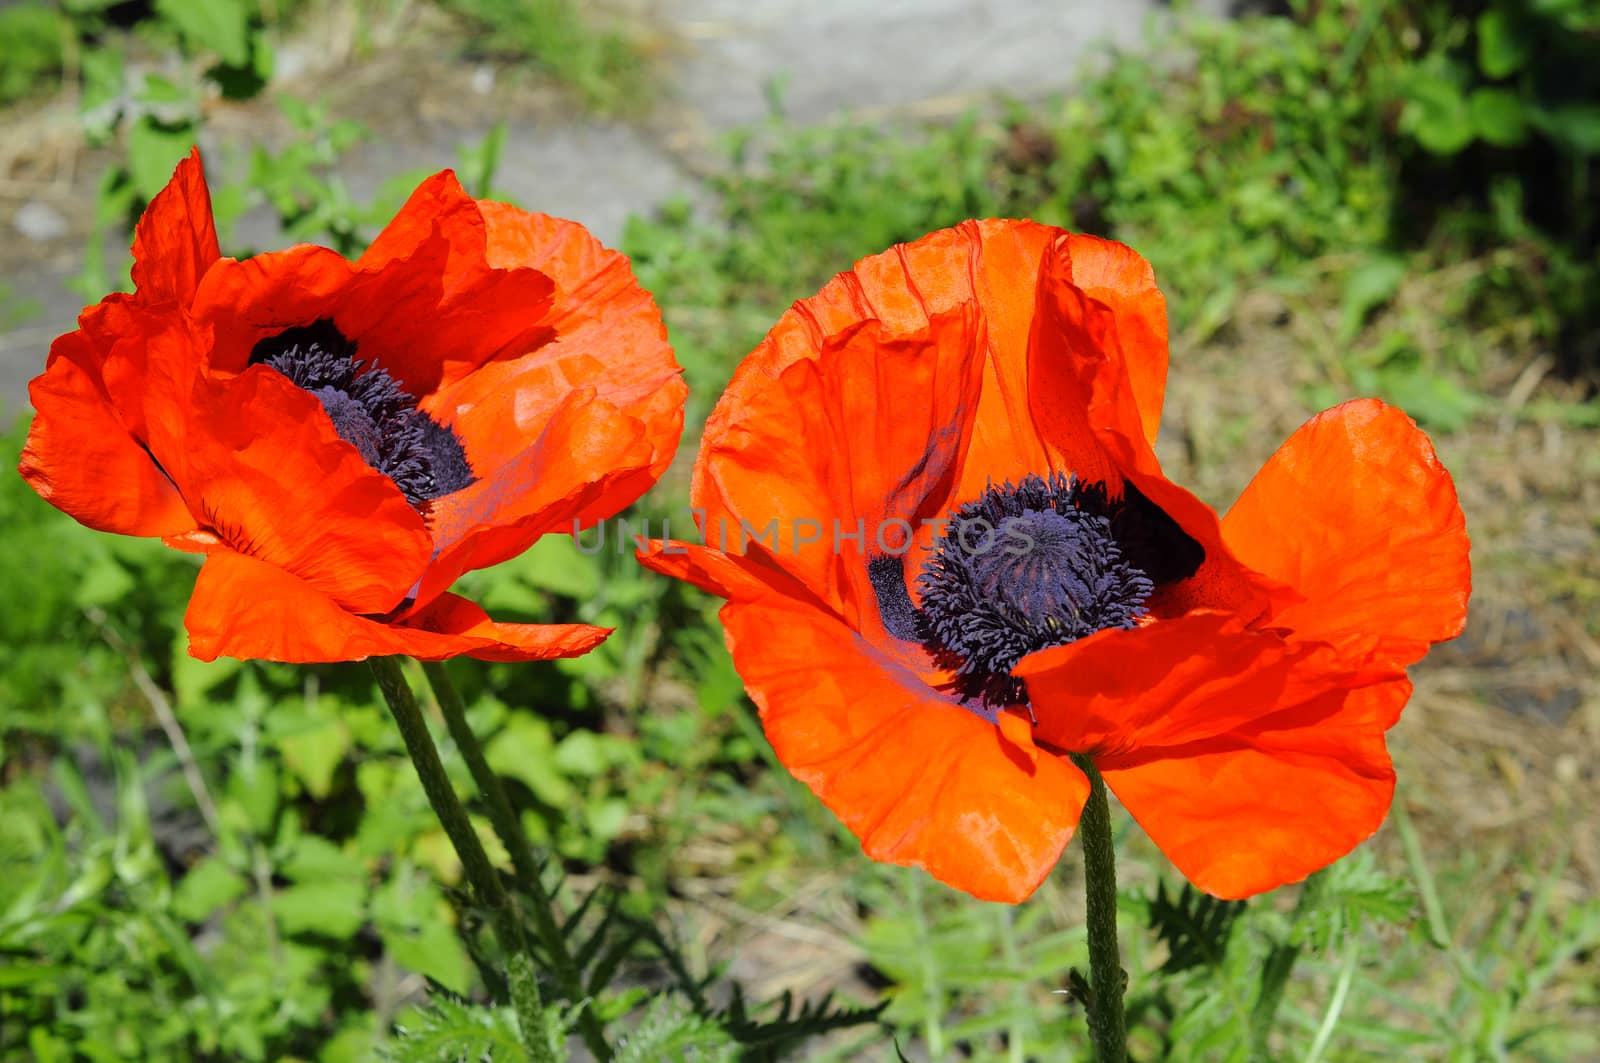 Big red poppies in a garden. by veronka72